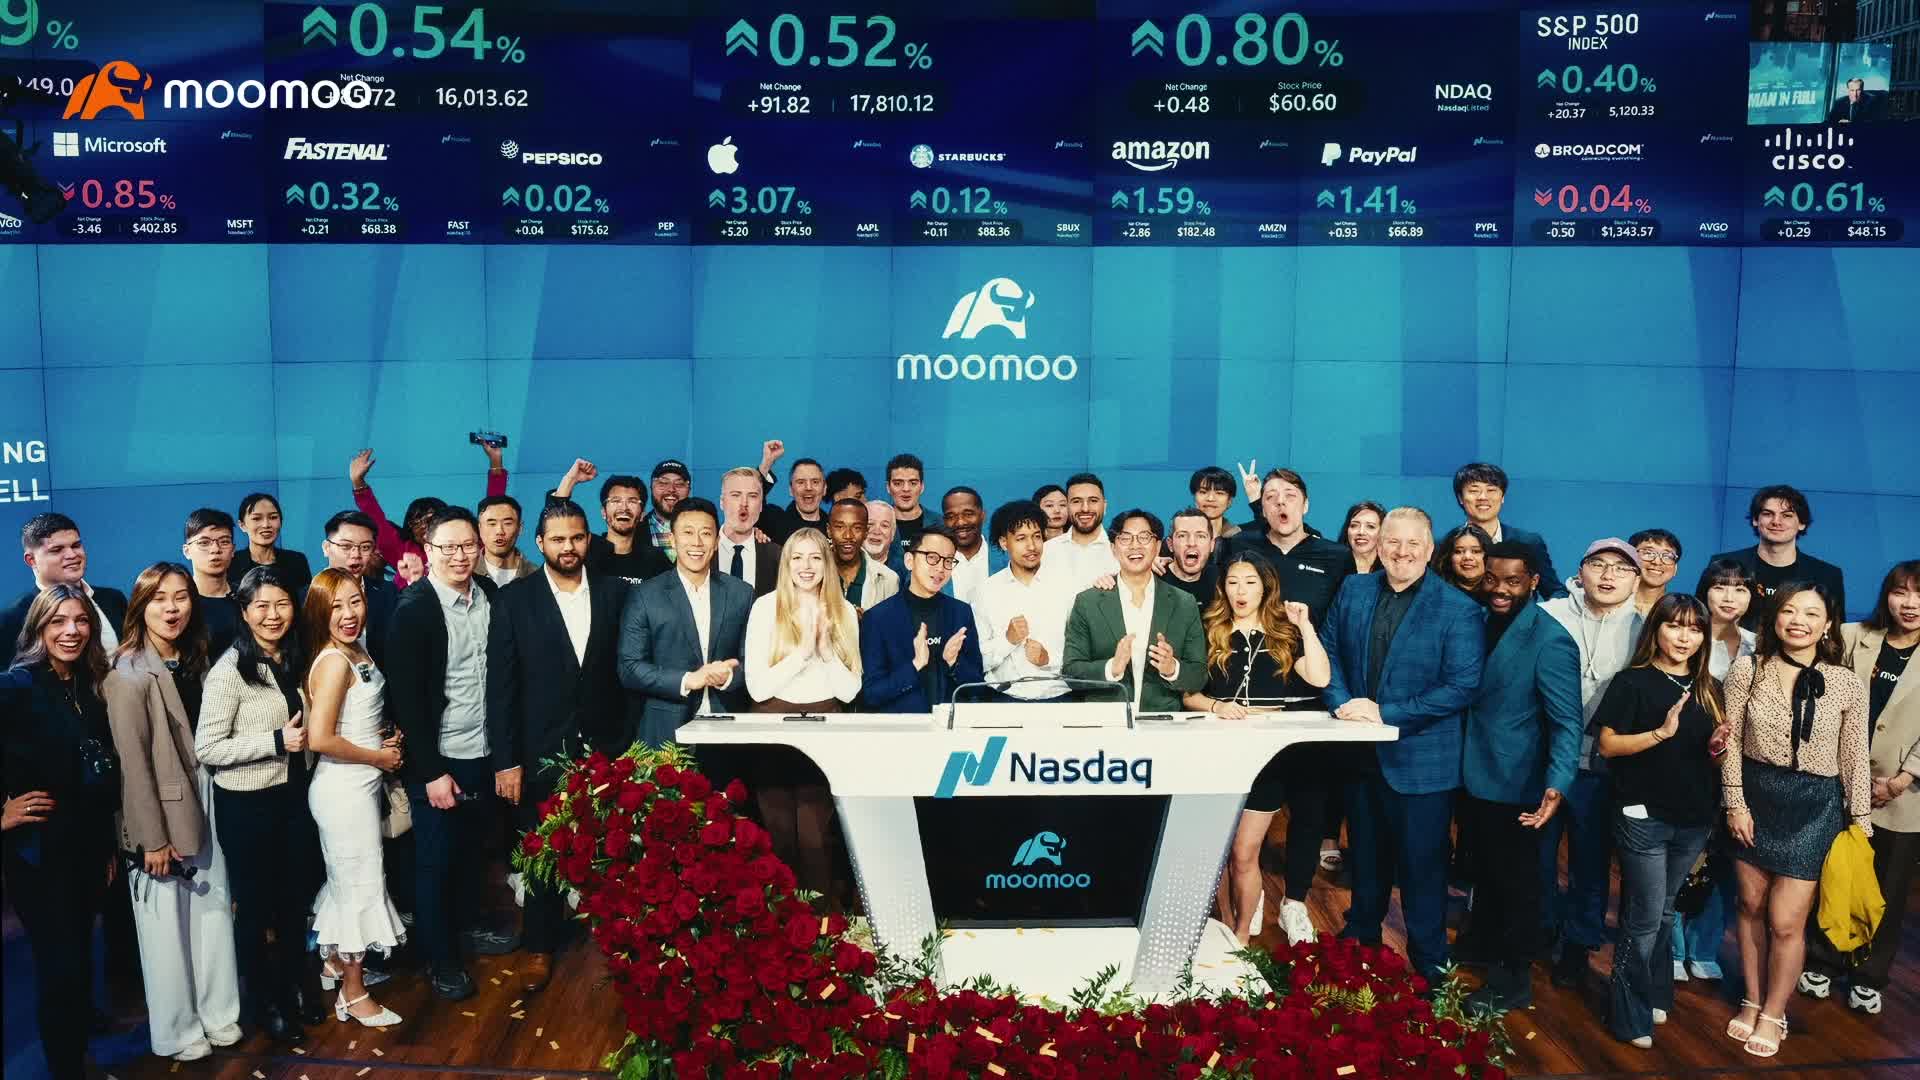 🎬 Let's have fun together: look back on Moomoo's NASDAQ tour!